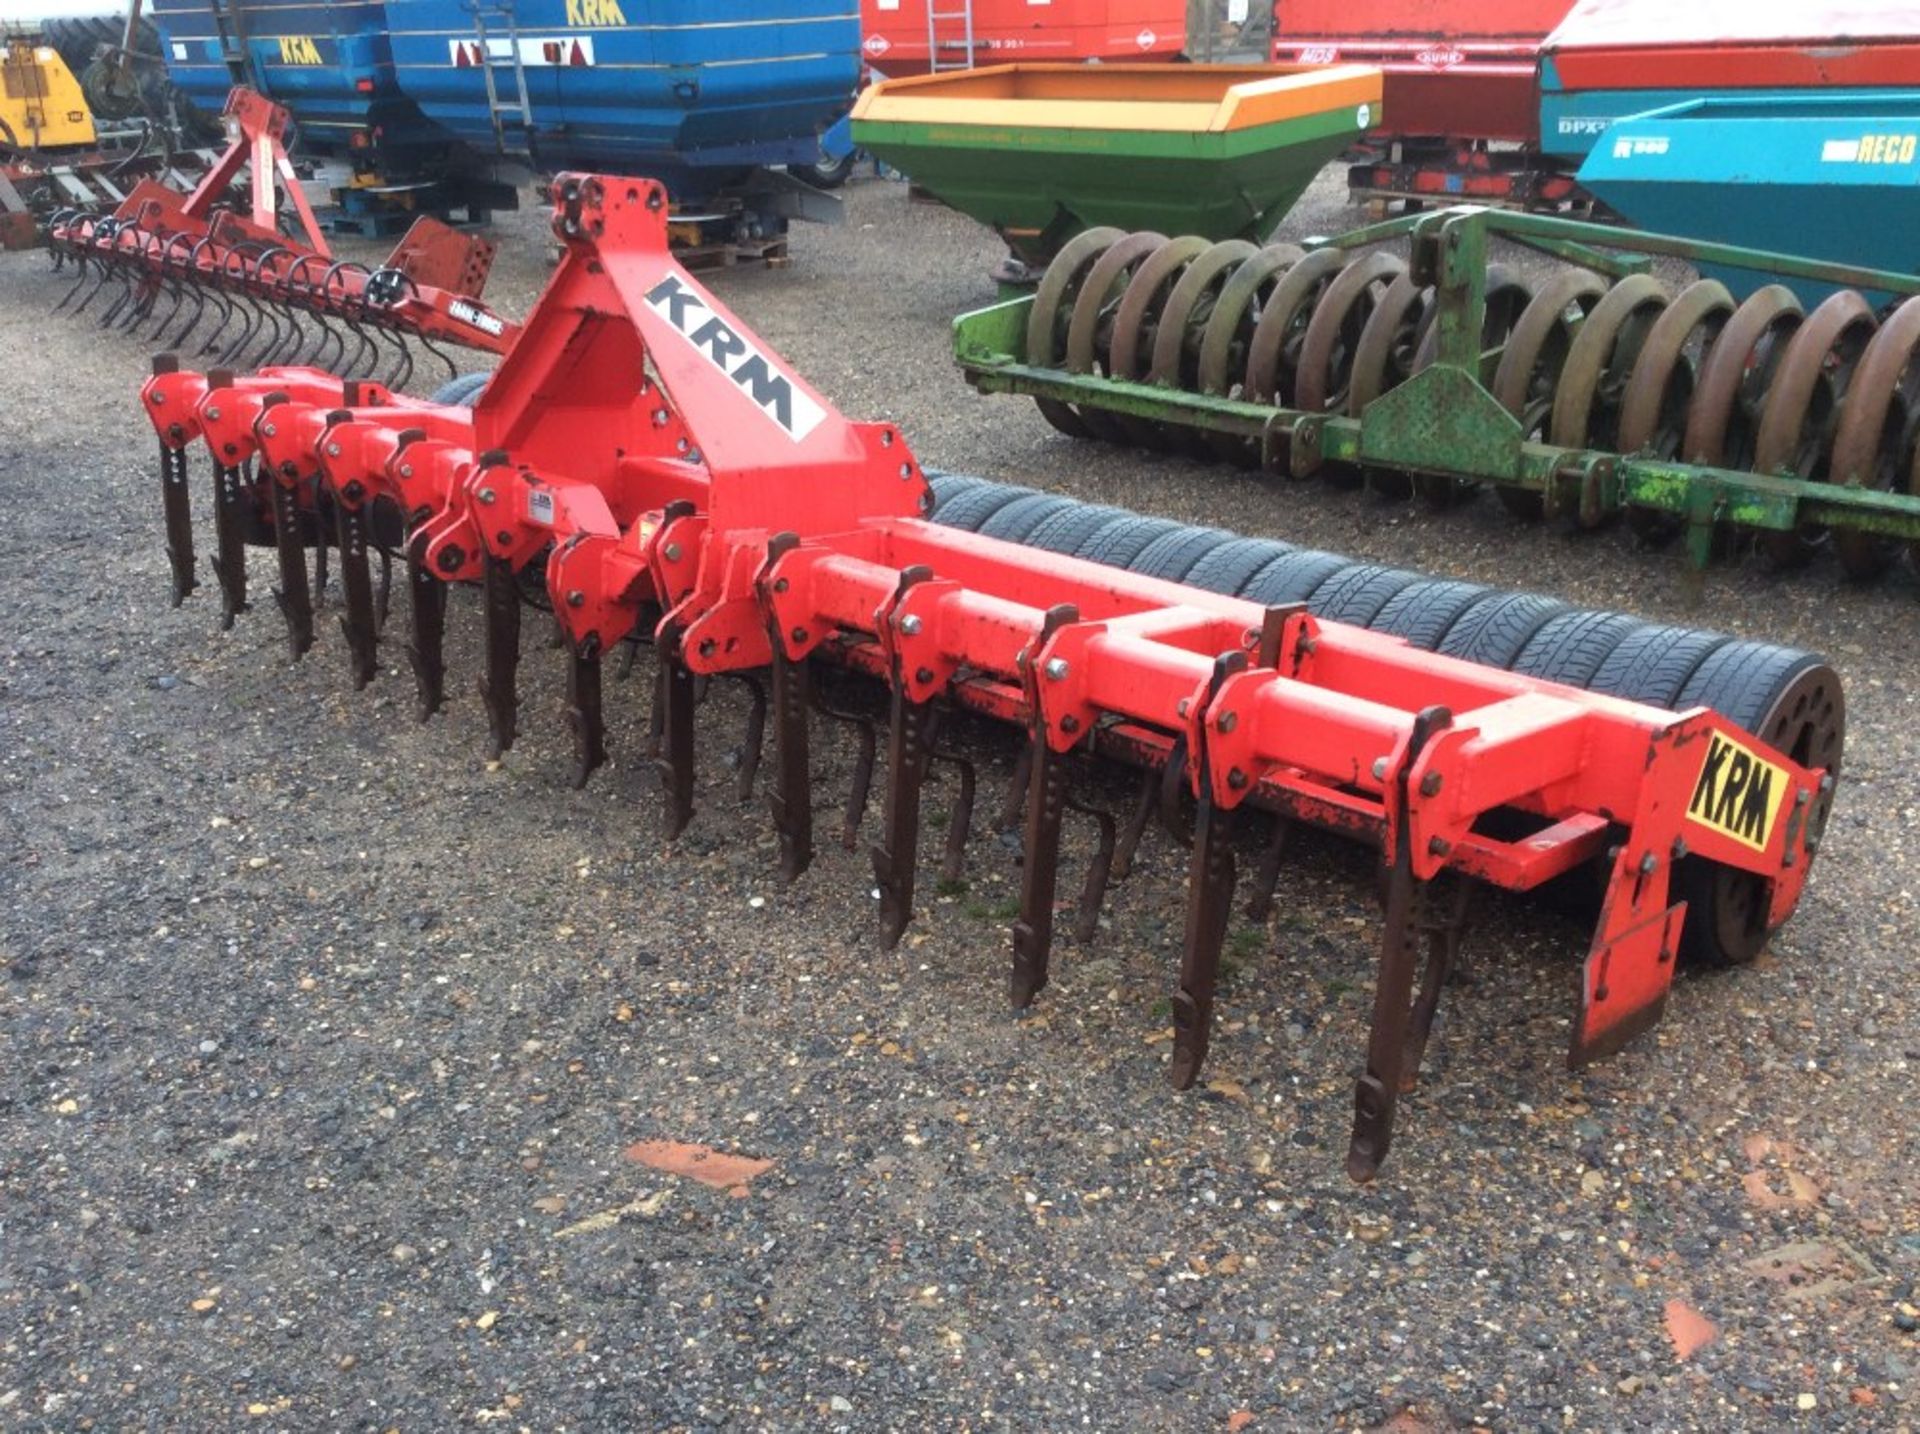 KRM 4M Opti-Cultivator. Comprising row of rigid tines, two rows of adjustable spring tines and